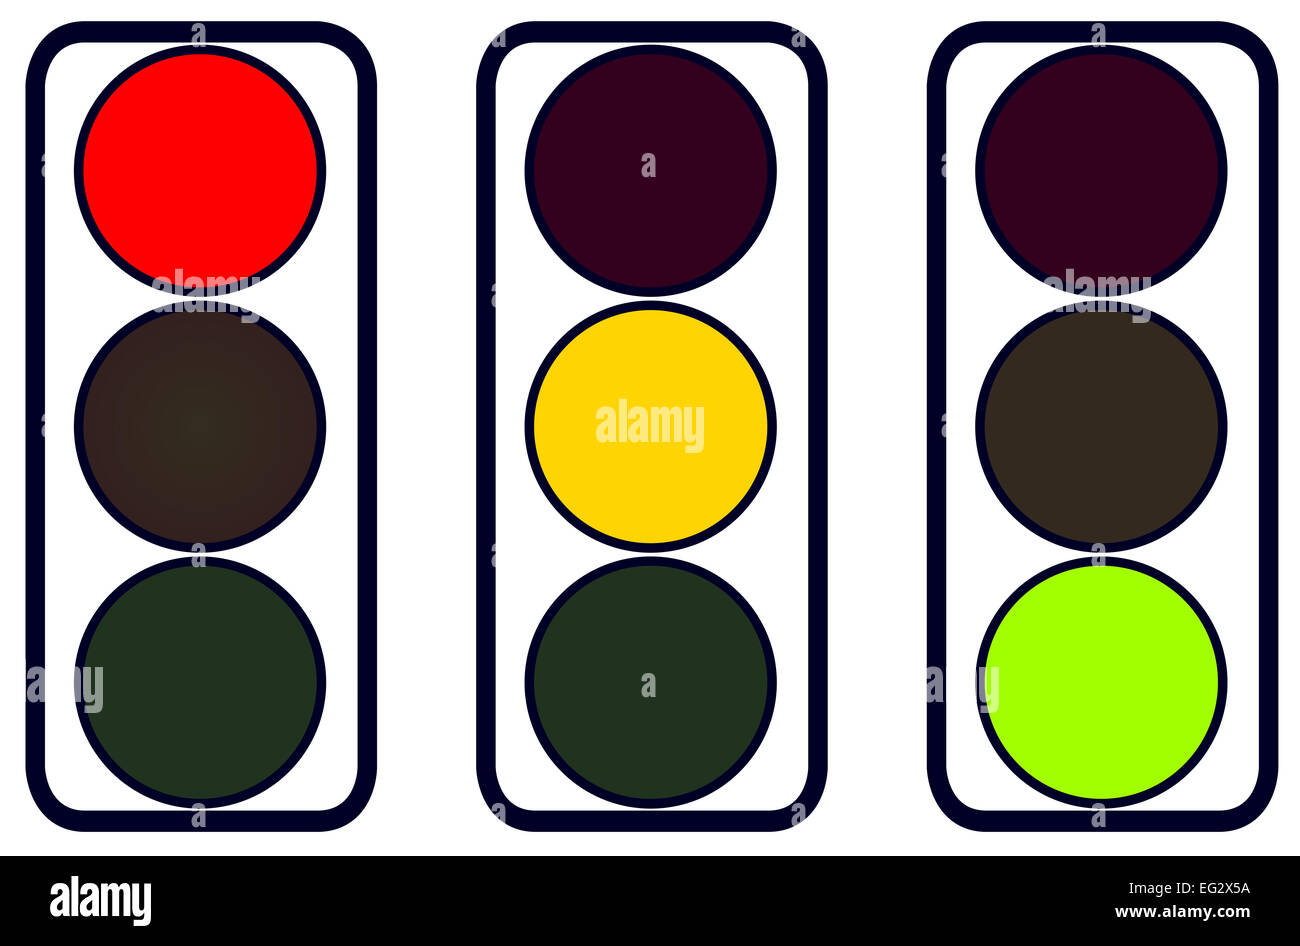 A set of traffic lights red amber and green over white Stock Photo